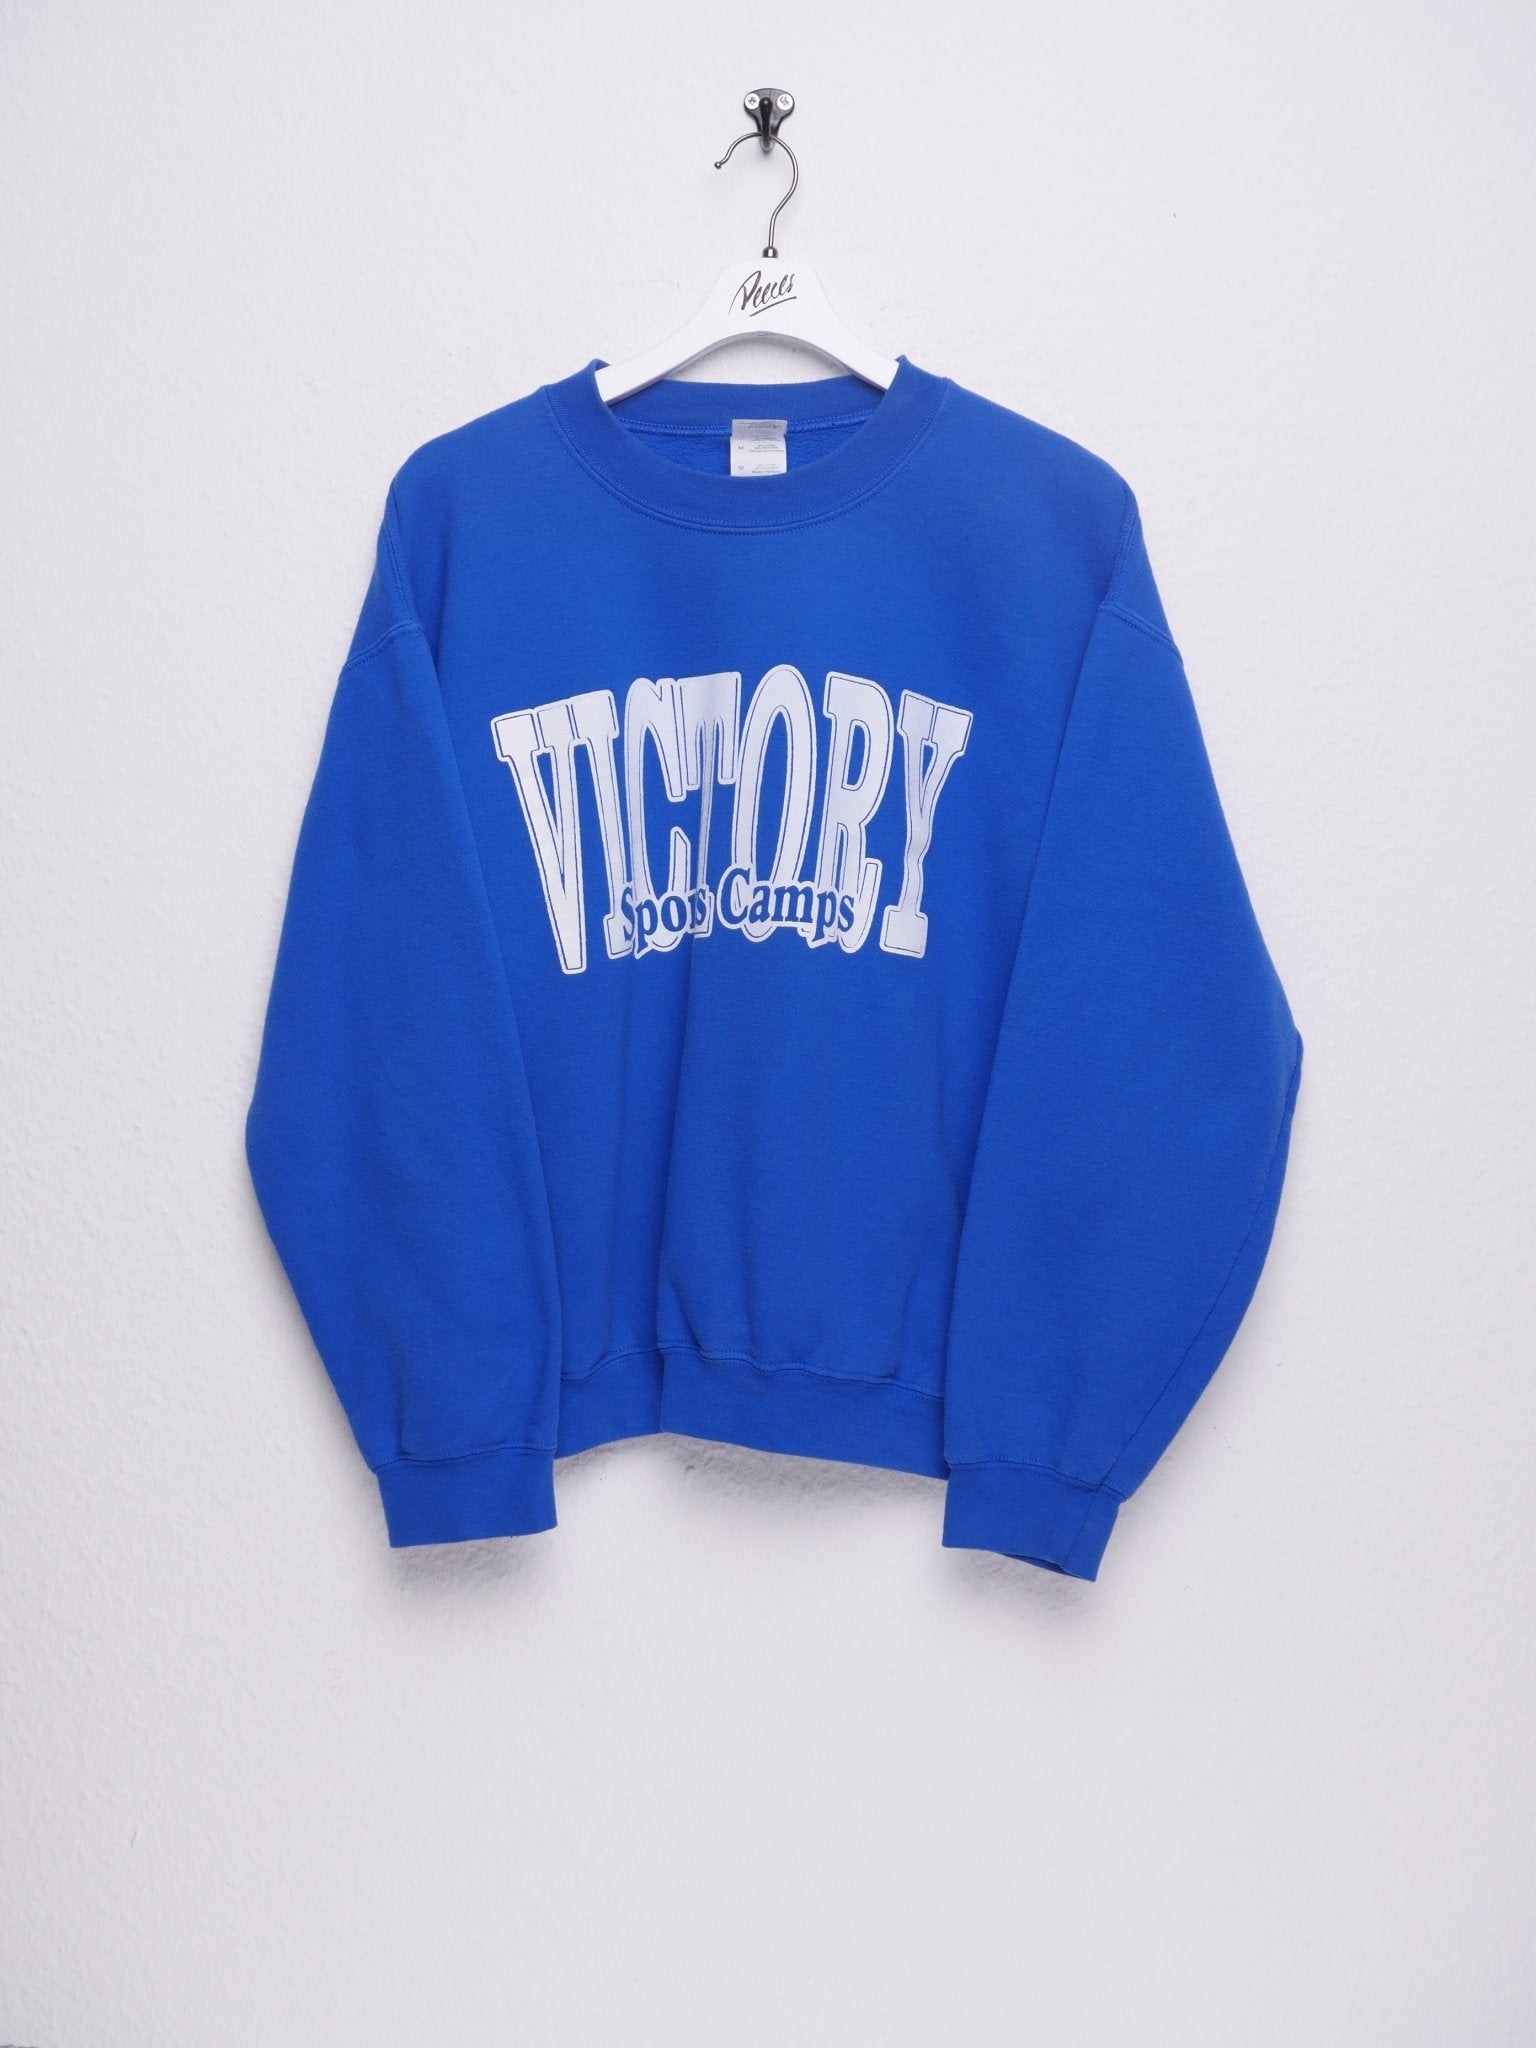 Victory Sports Camps printed Logo Sweater - Peeces